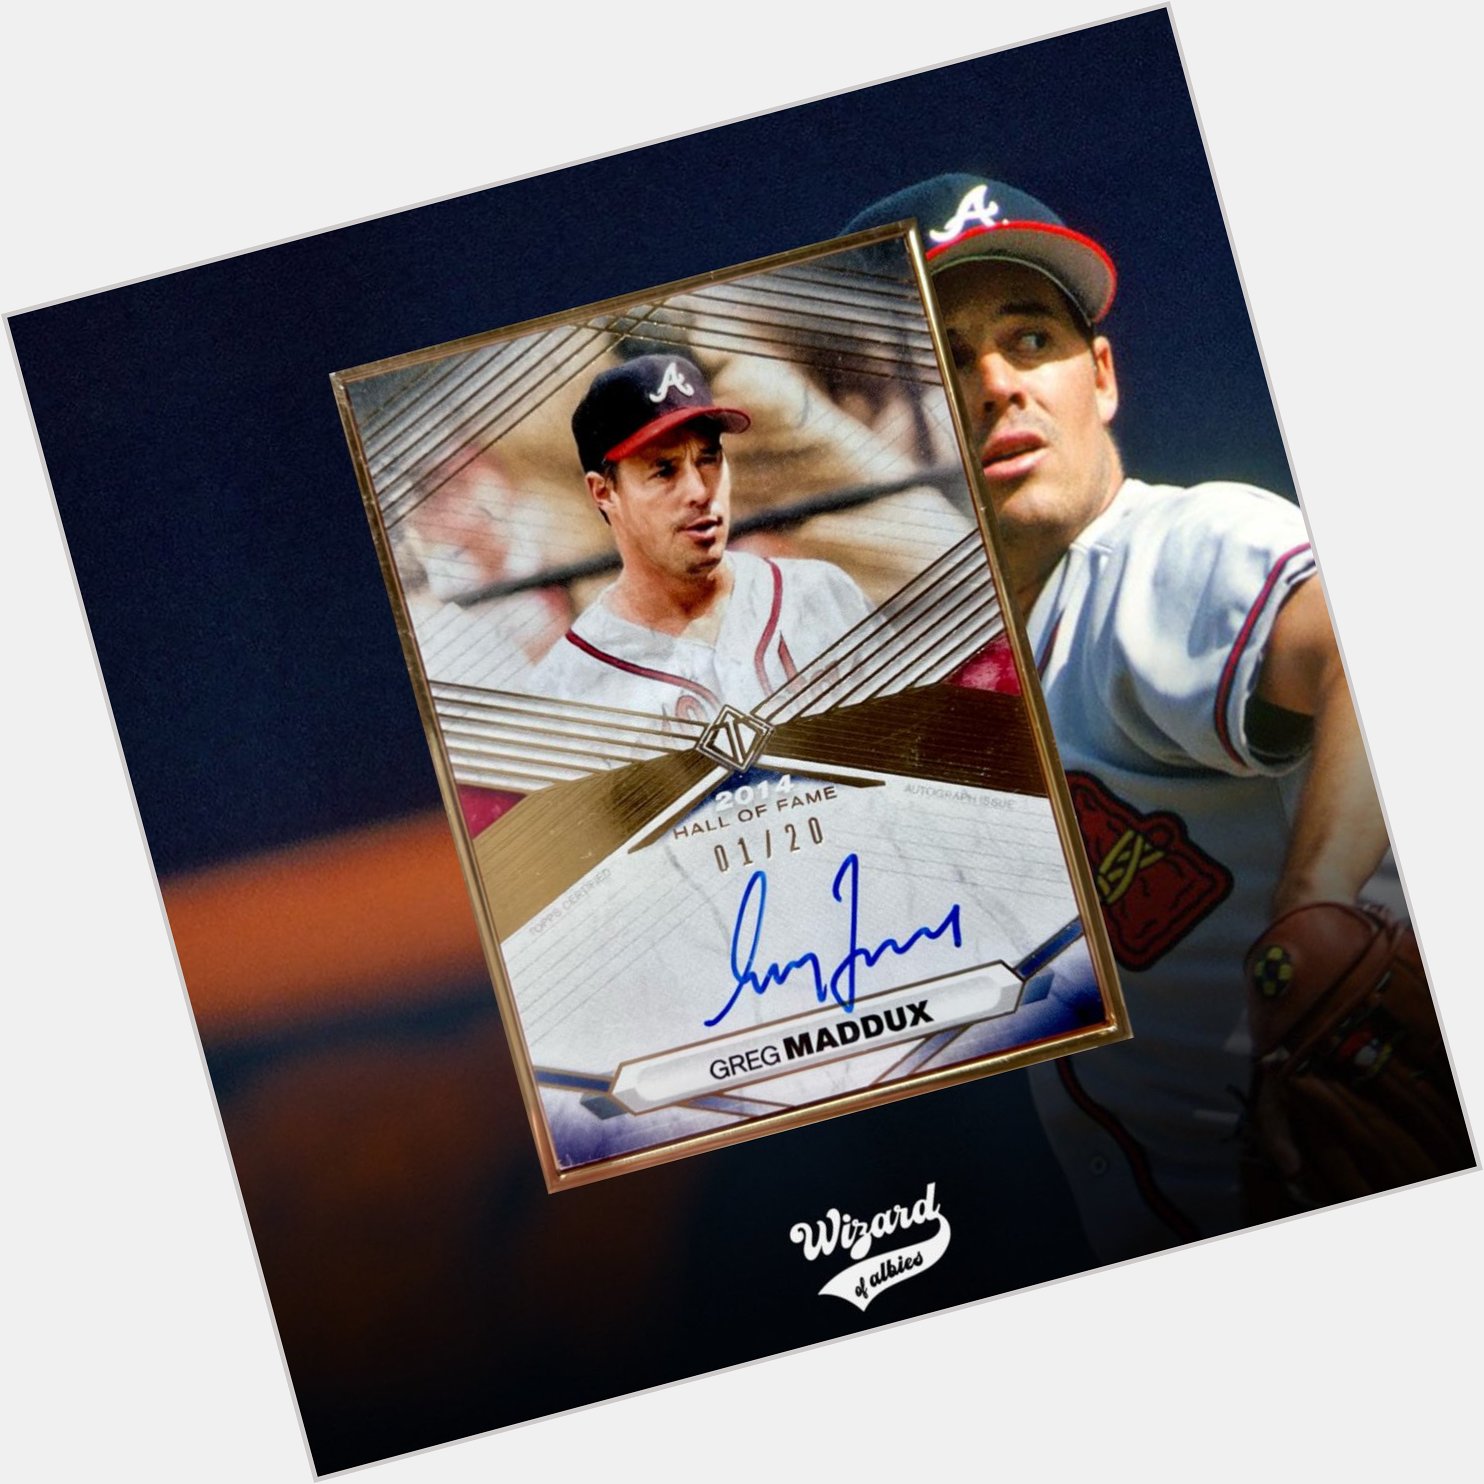 Happy Birthday to The Professor Sharing my favorite Greg Maddux card from my collection today! 